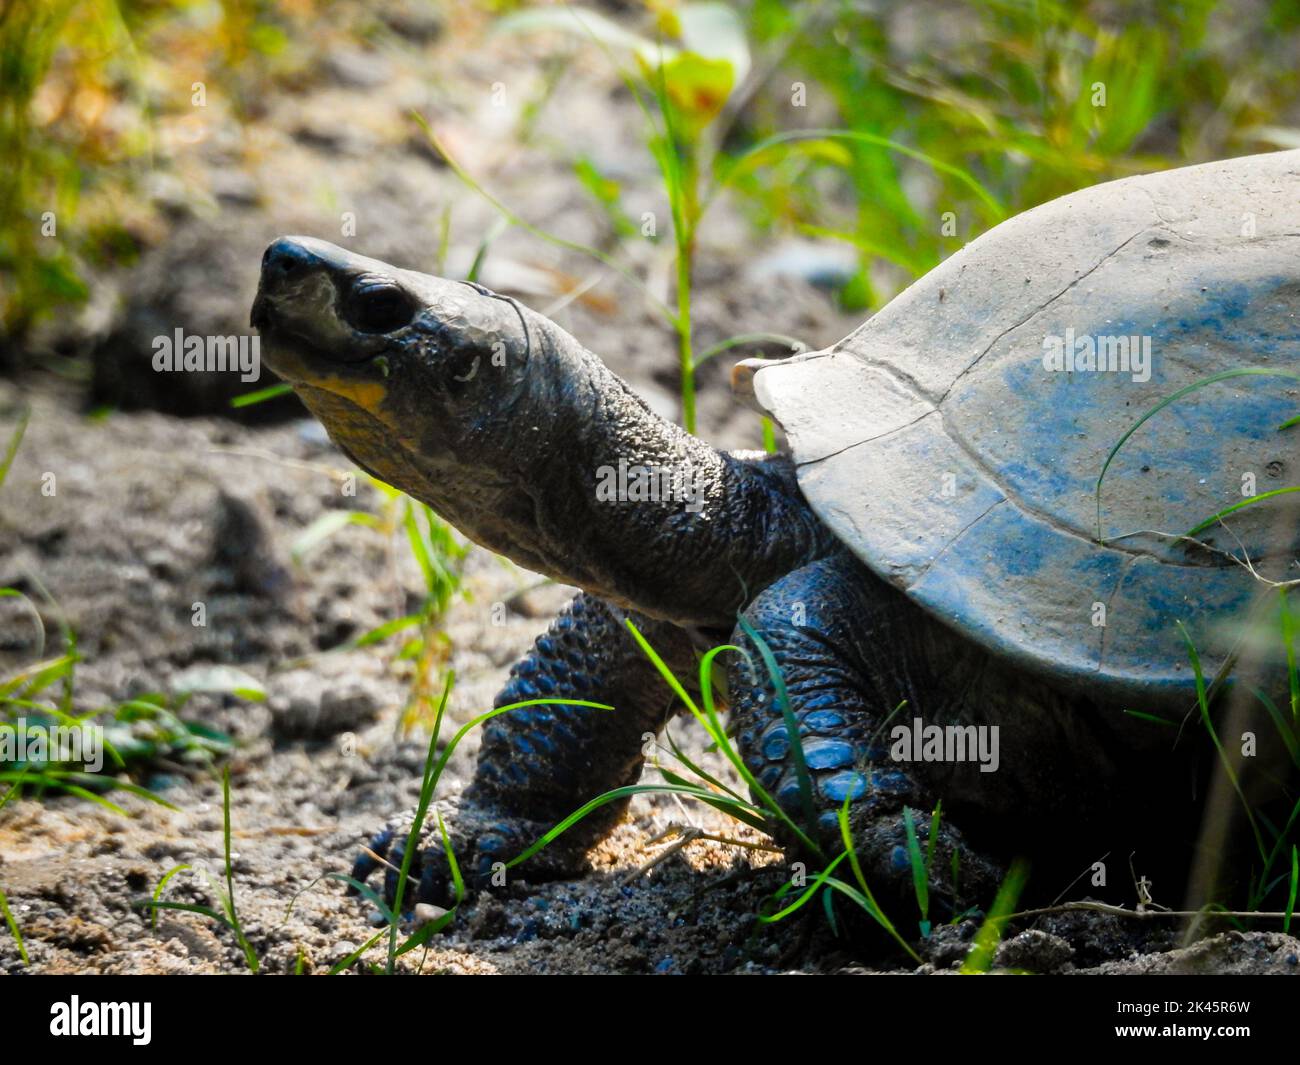 August 18th 2018, dehradun City Uttarakhand India. A tortoise looking neck up out of it's shell at Malsi Dehradun City Zoo. Stock Photo